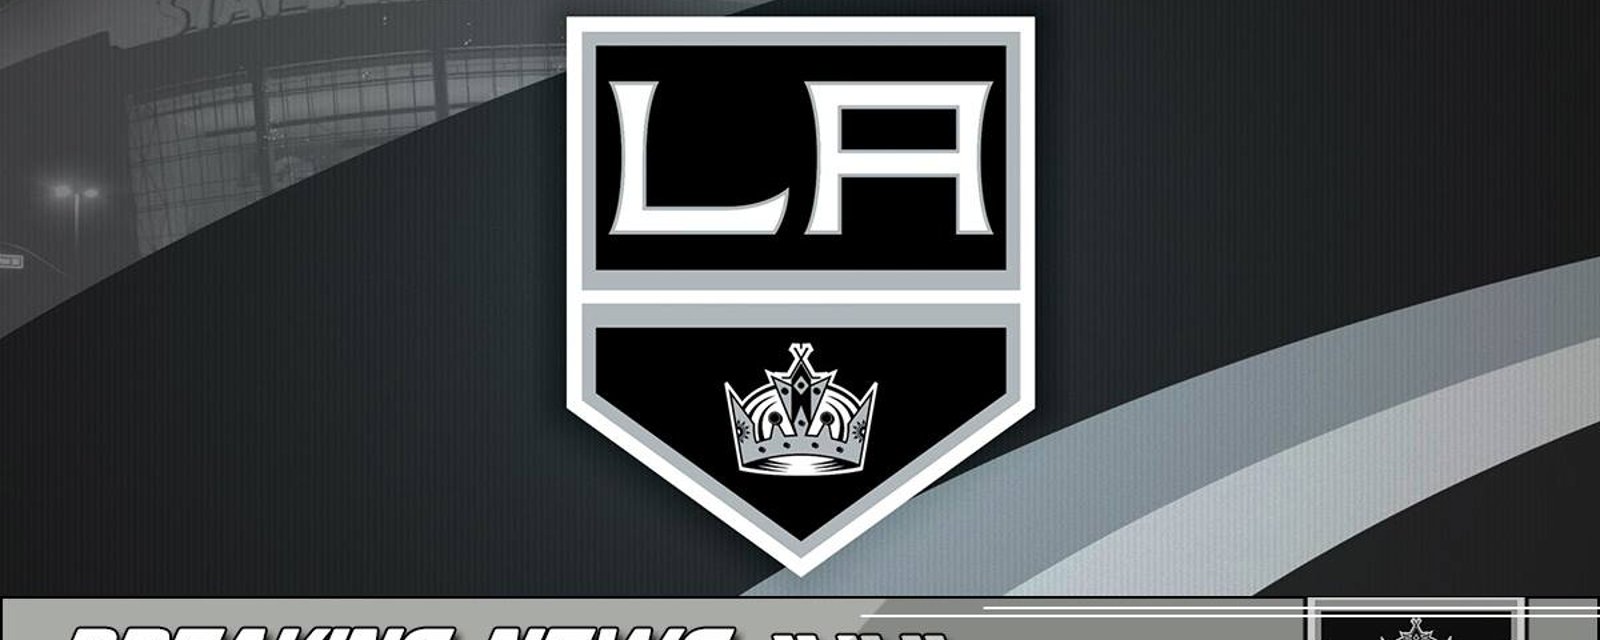 Breaking: The Los Angeles Kings have announced a trade!